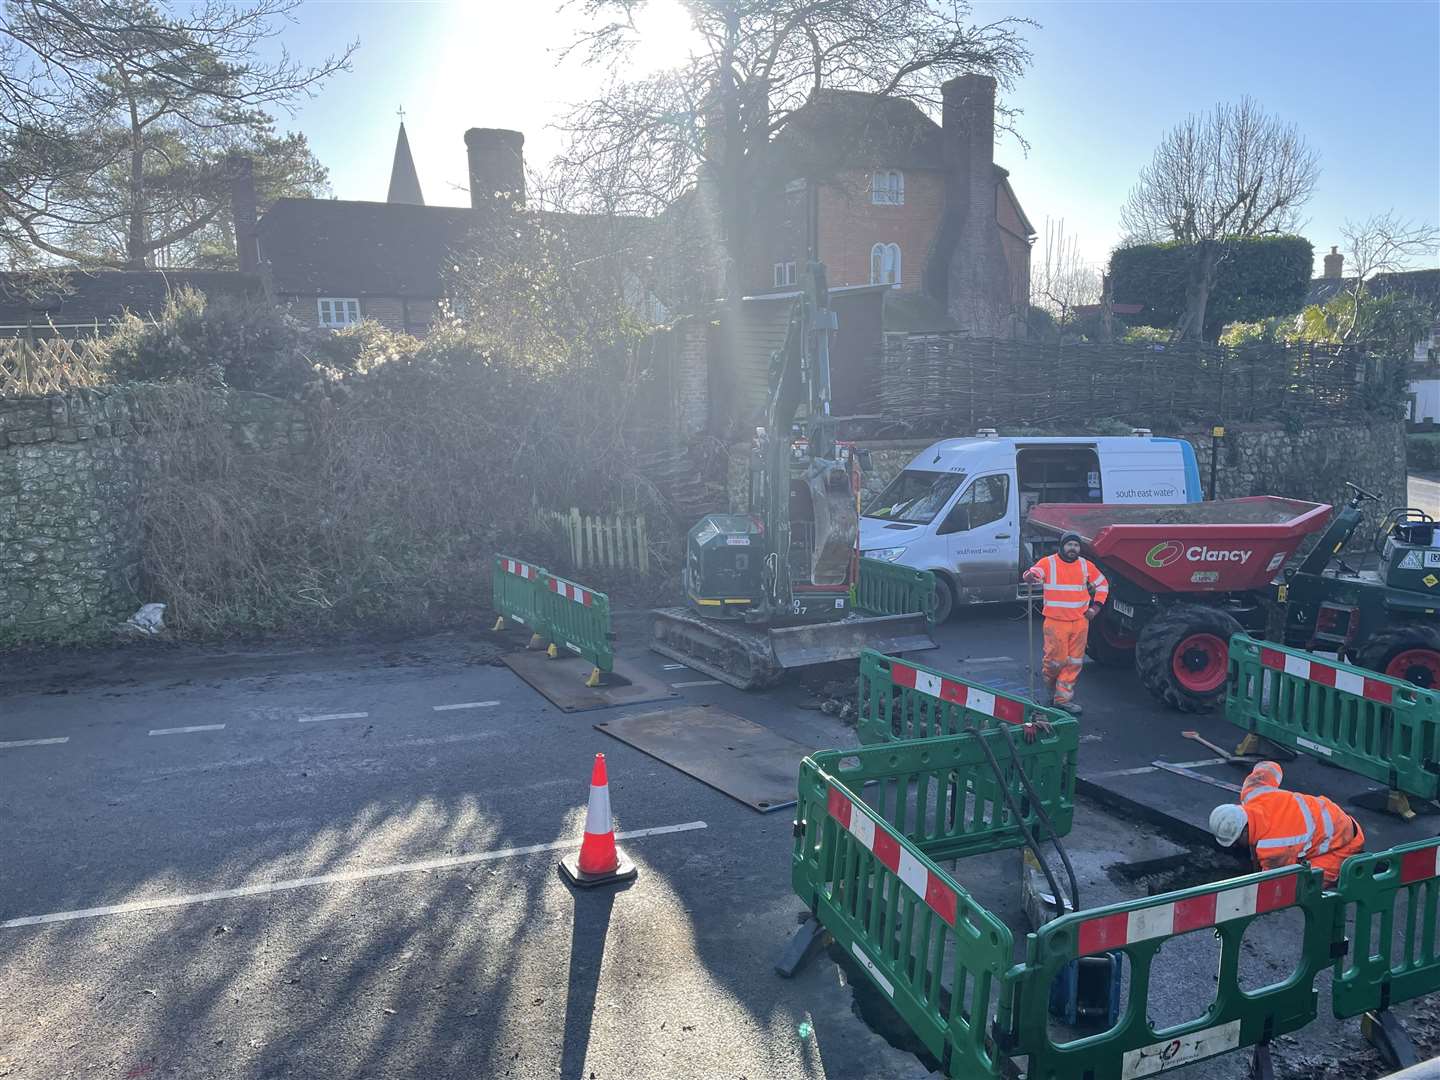 The work is being carried out right next to The Black Horse pub